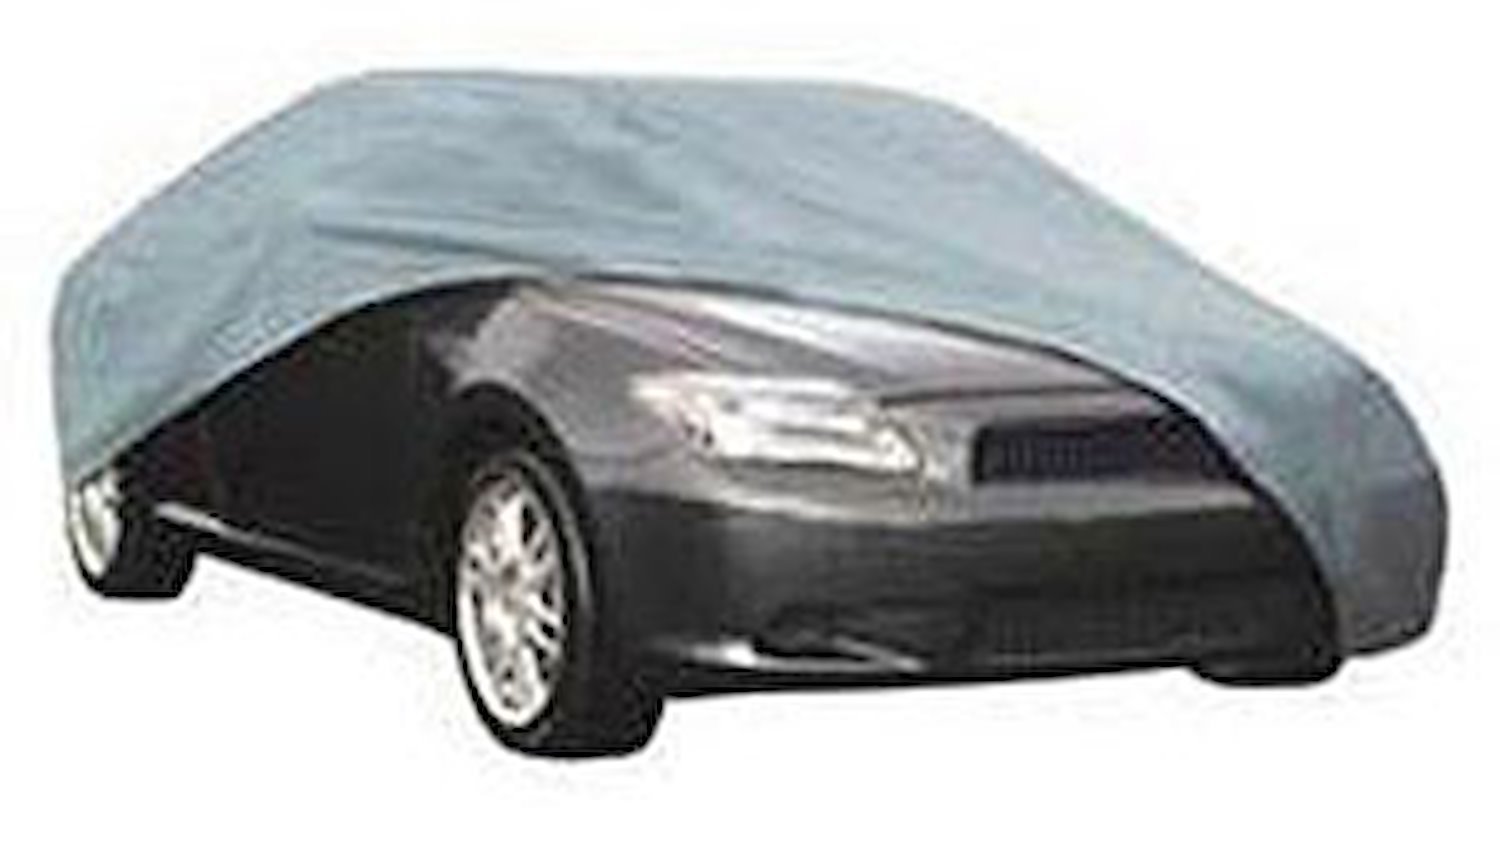 Budge Lite Car Cover Fits Cars Up To 13" 1" in Length